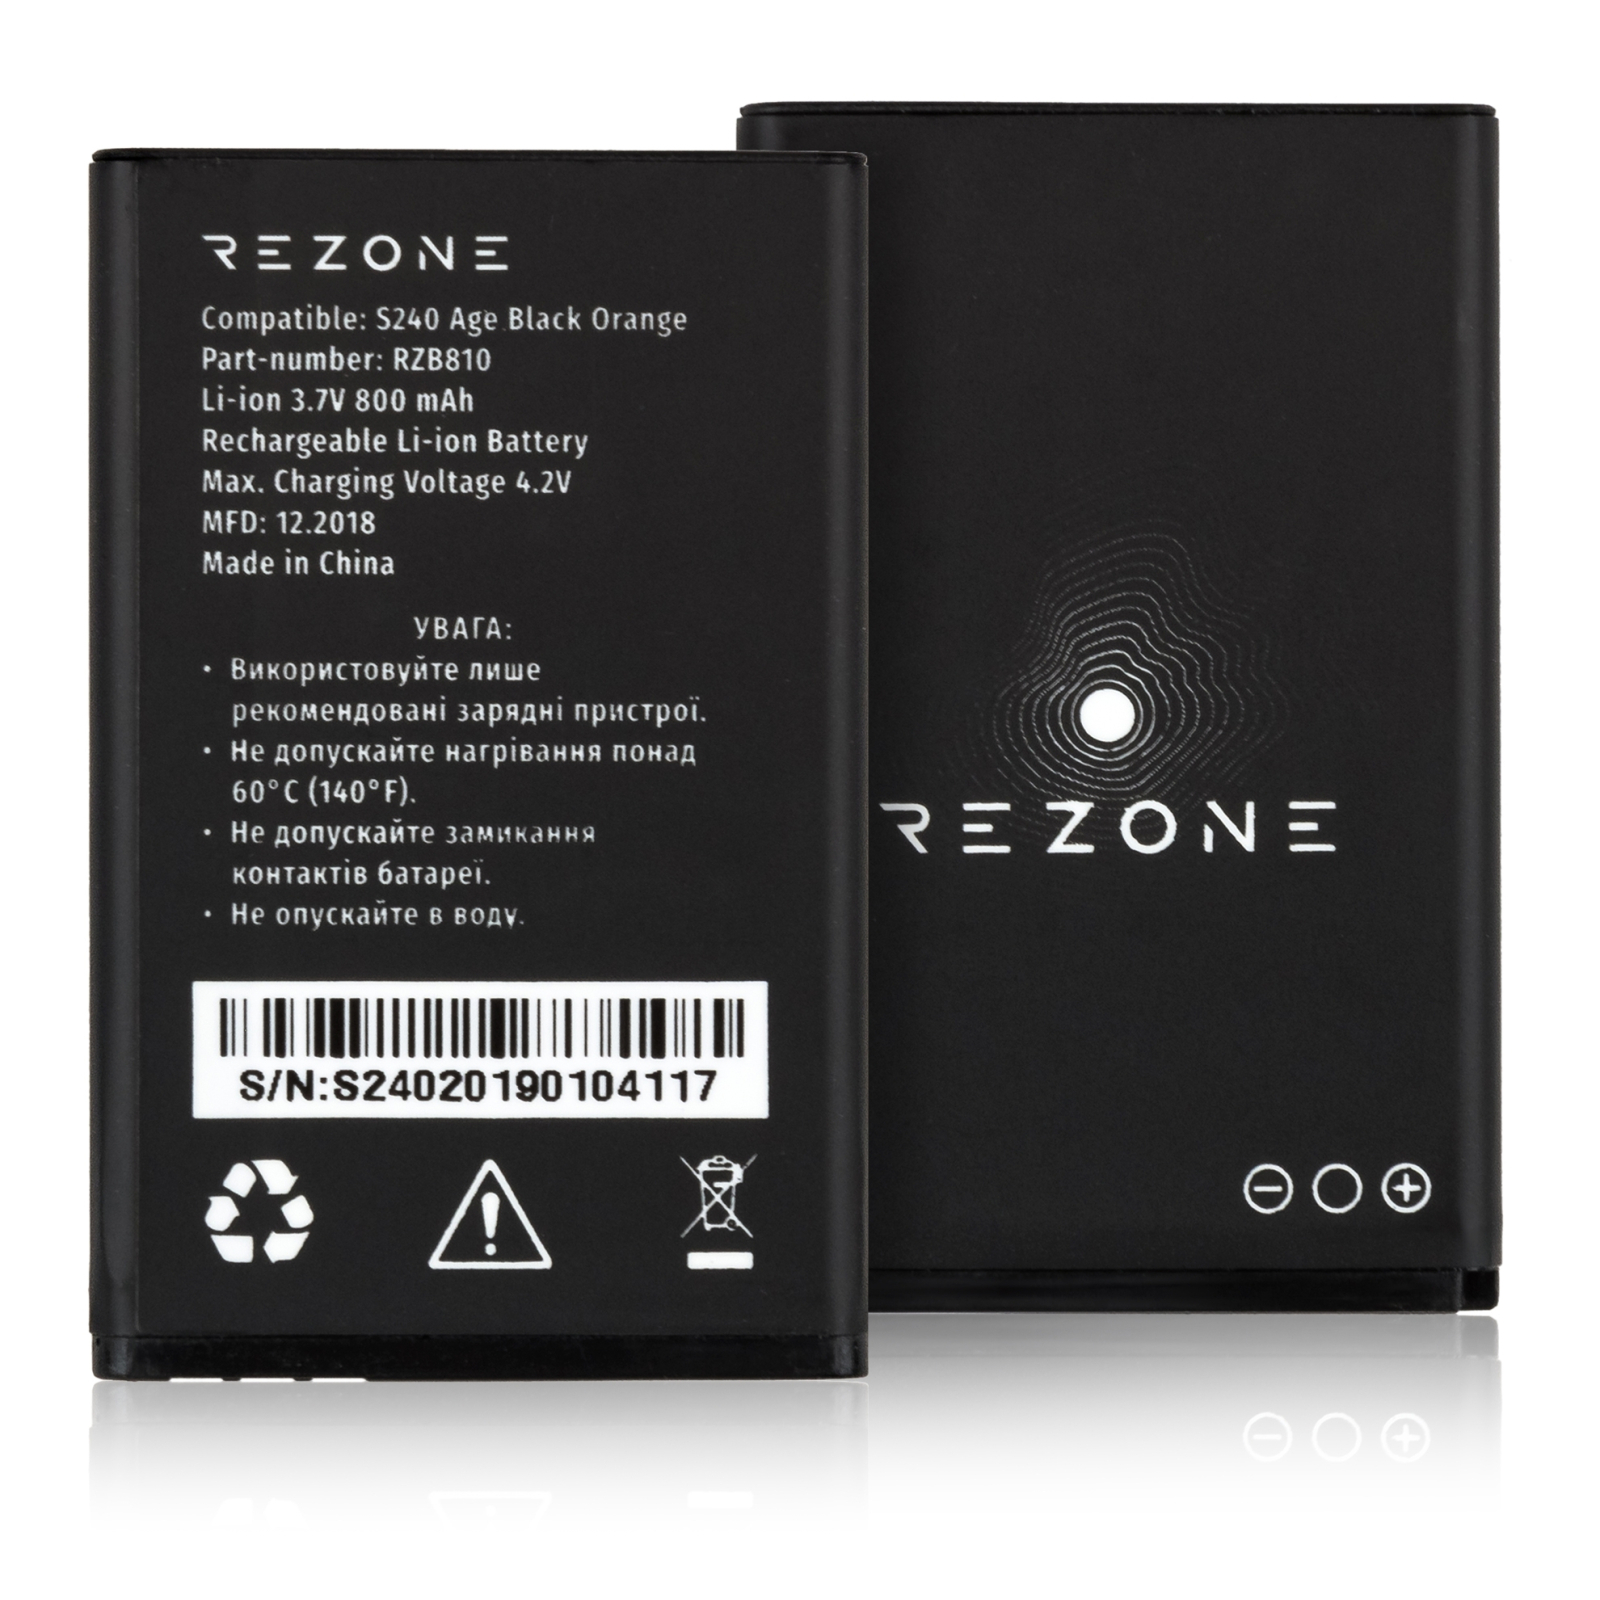 Акумуляторна батарея Rezone for S240 Age / A170 Point 800mah (compatible with BL-4C) (BL-4C) зображення 3